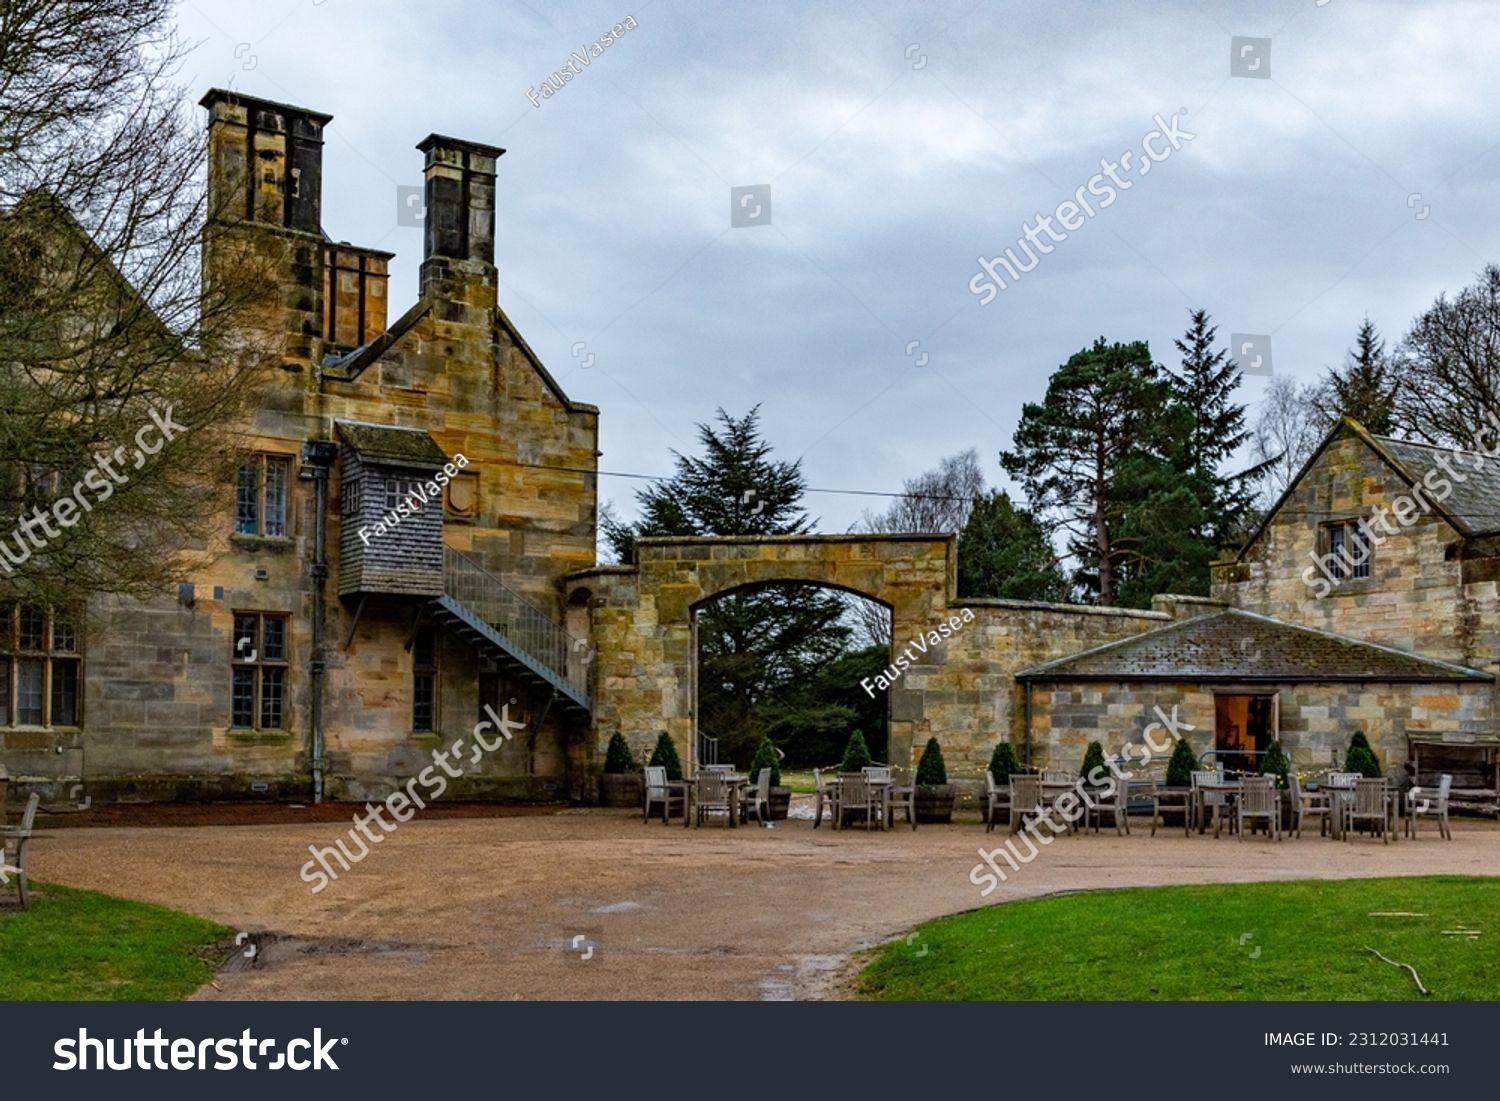 A beautiful architecture in England, hidden in the forest  #2312031441